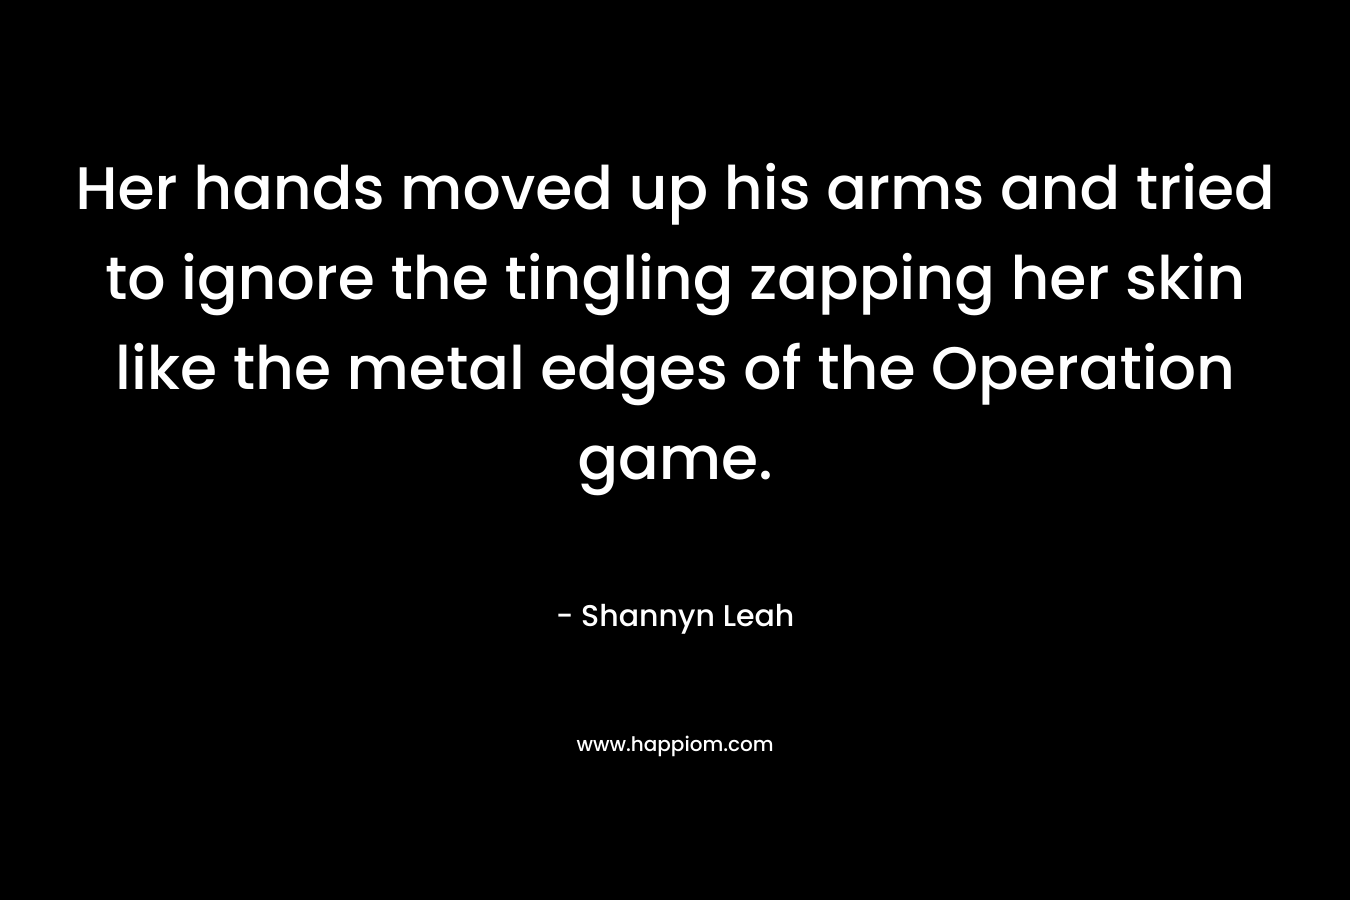 Her hands moved up his arms and tried to ignore the tingling zapping her skin like the metal edges of the Operation game. – Shannyn Leah